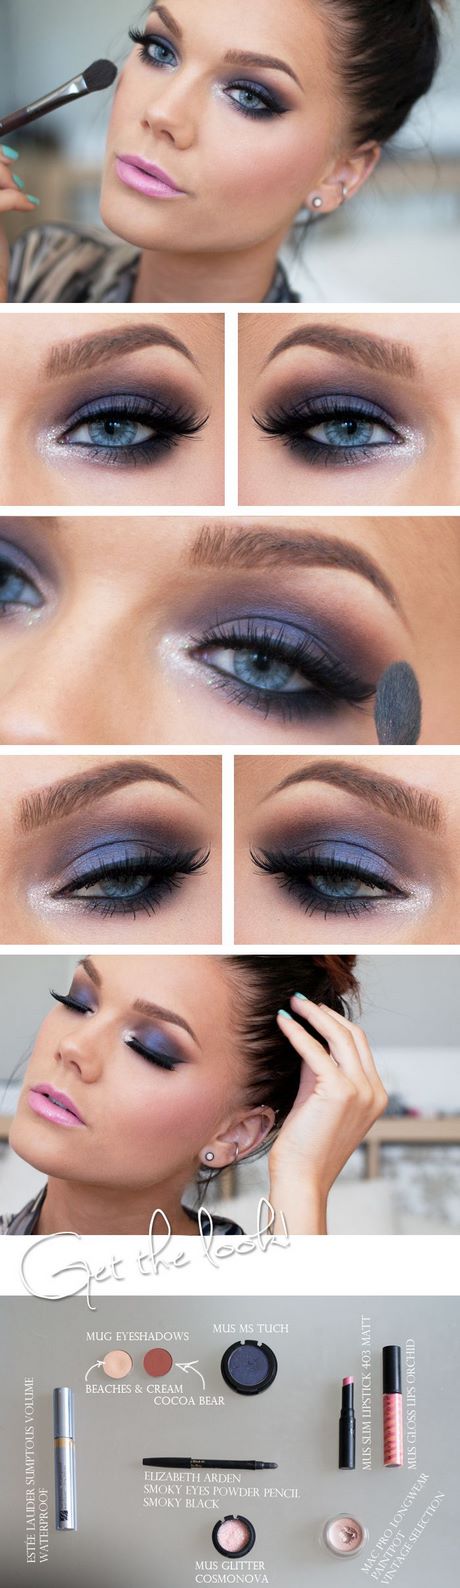 new-years-makeup-tutorial-for-beginners-03_16 Nieuwjaars make-up tutorial voor beginners